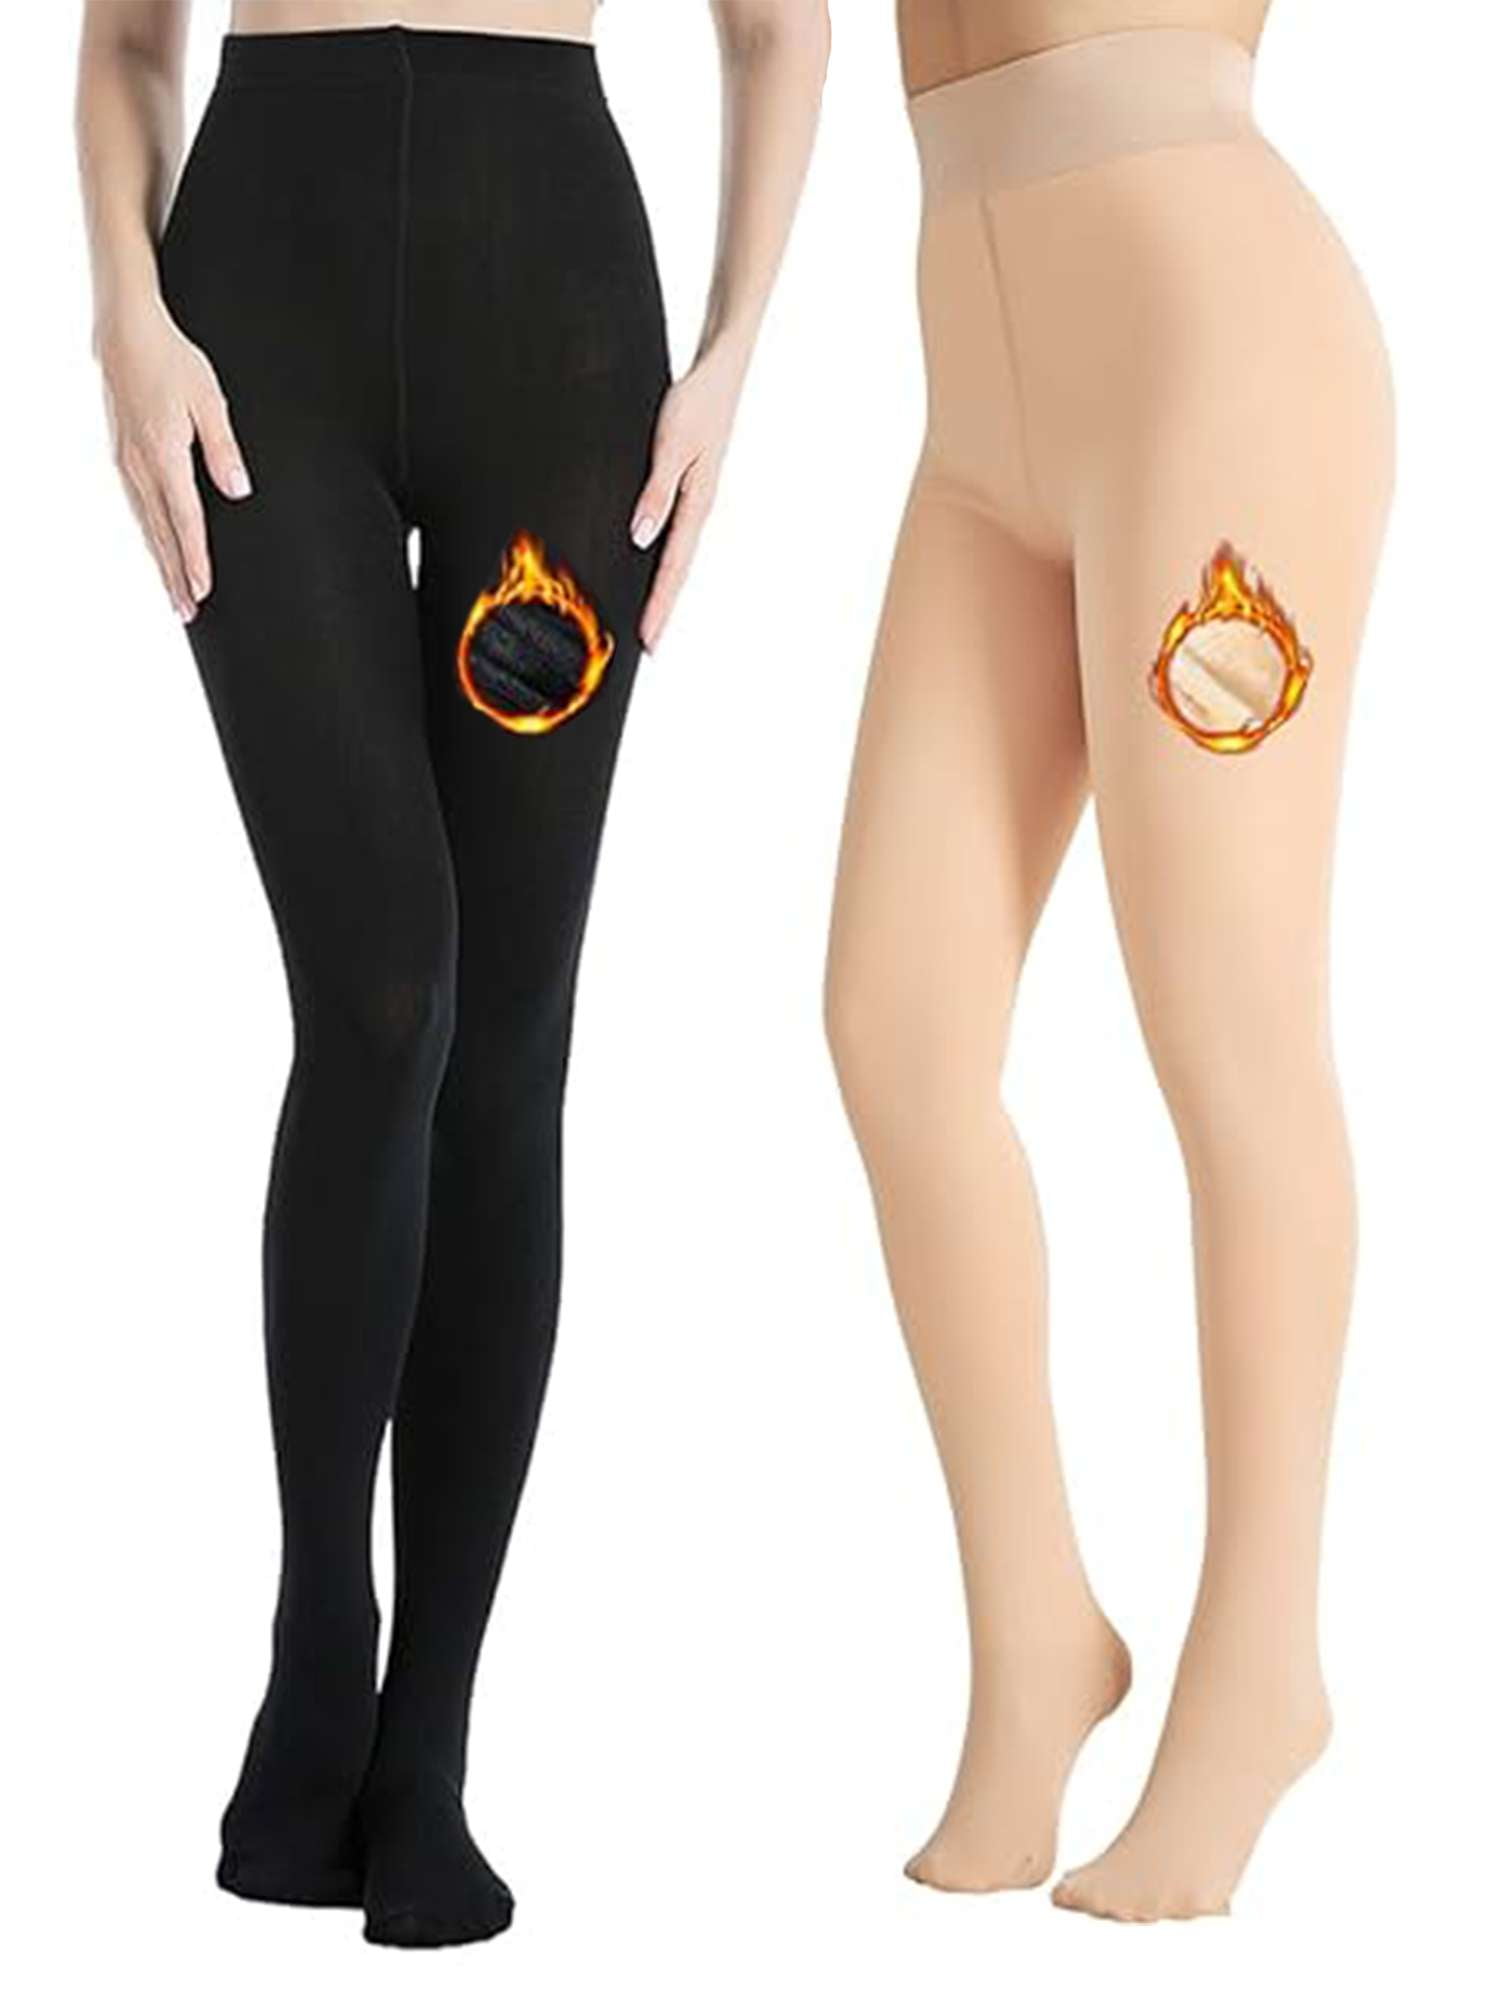 Thermal Tights Lined, Legs Slimming Tights Women's Winter Fake